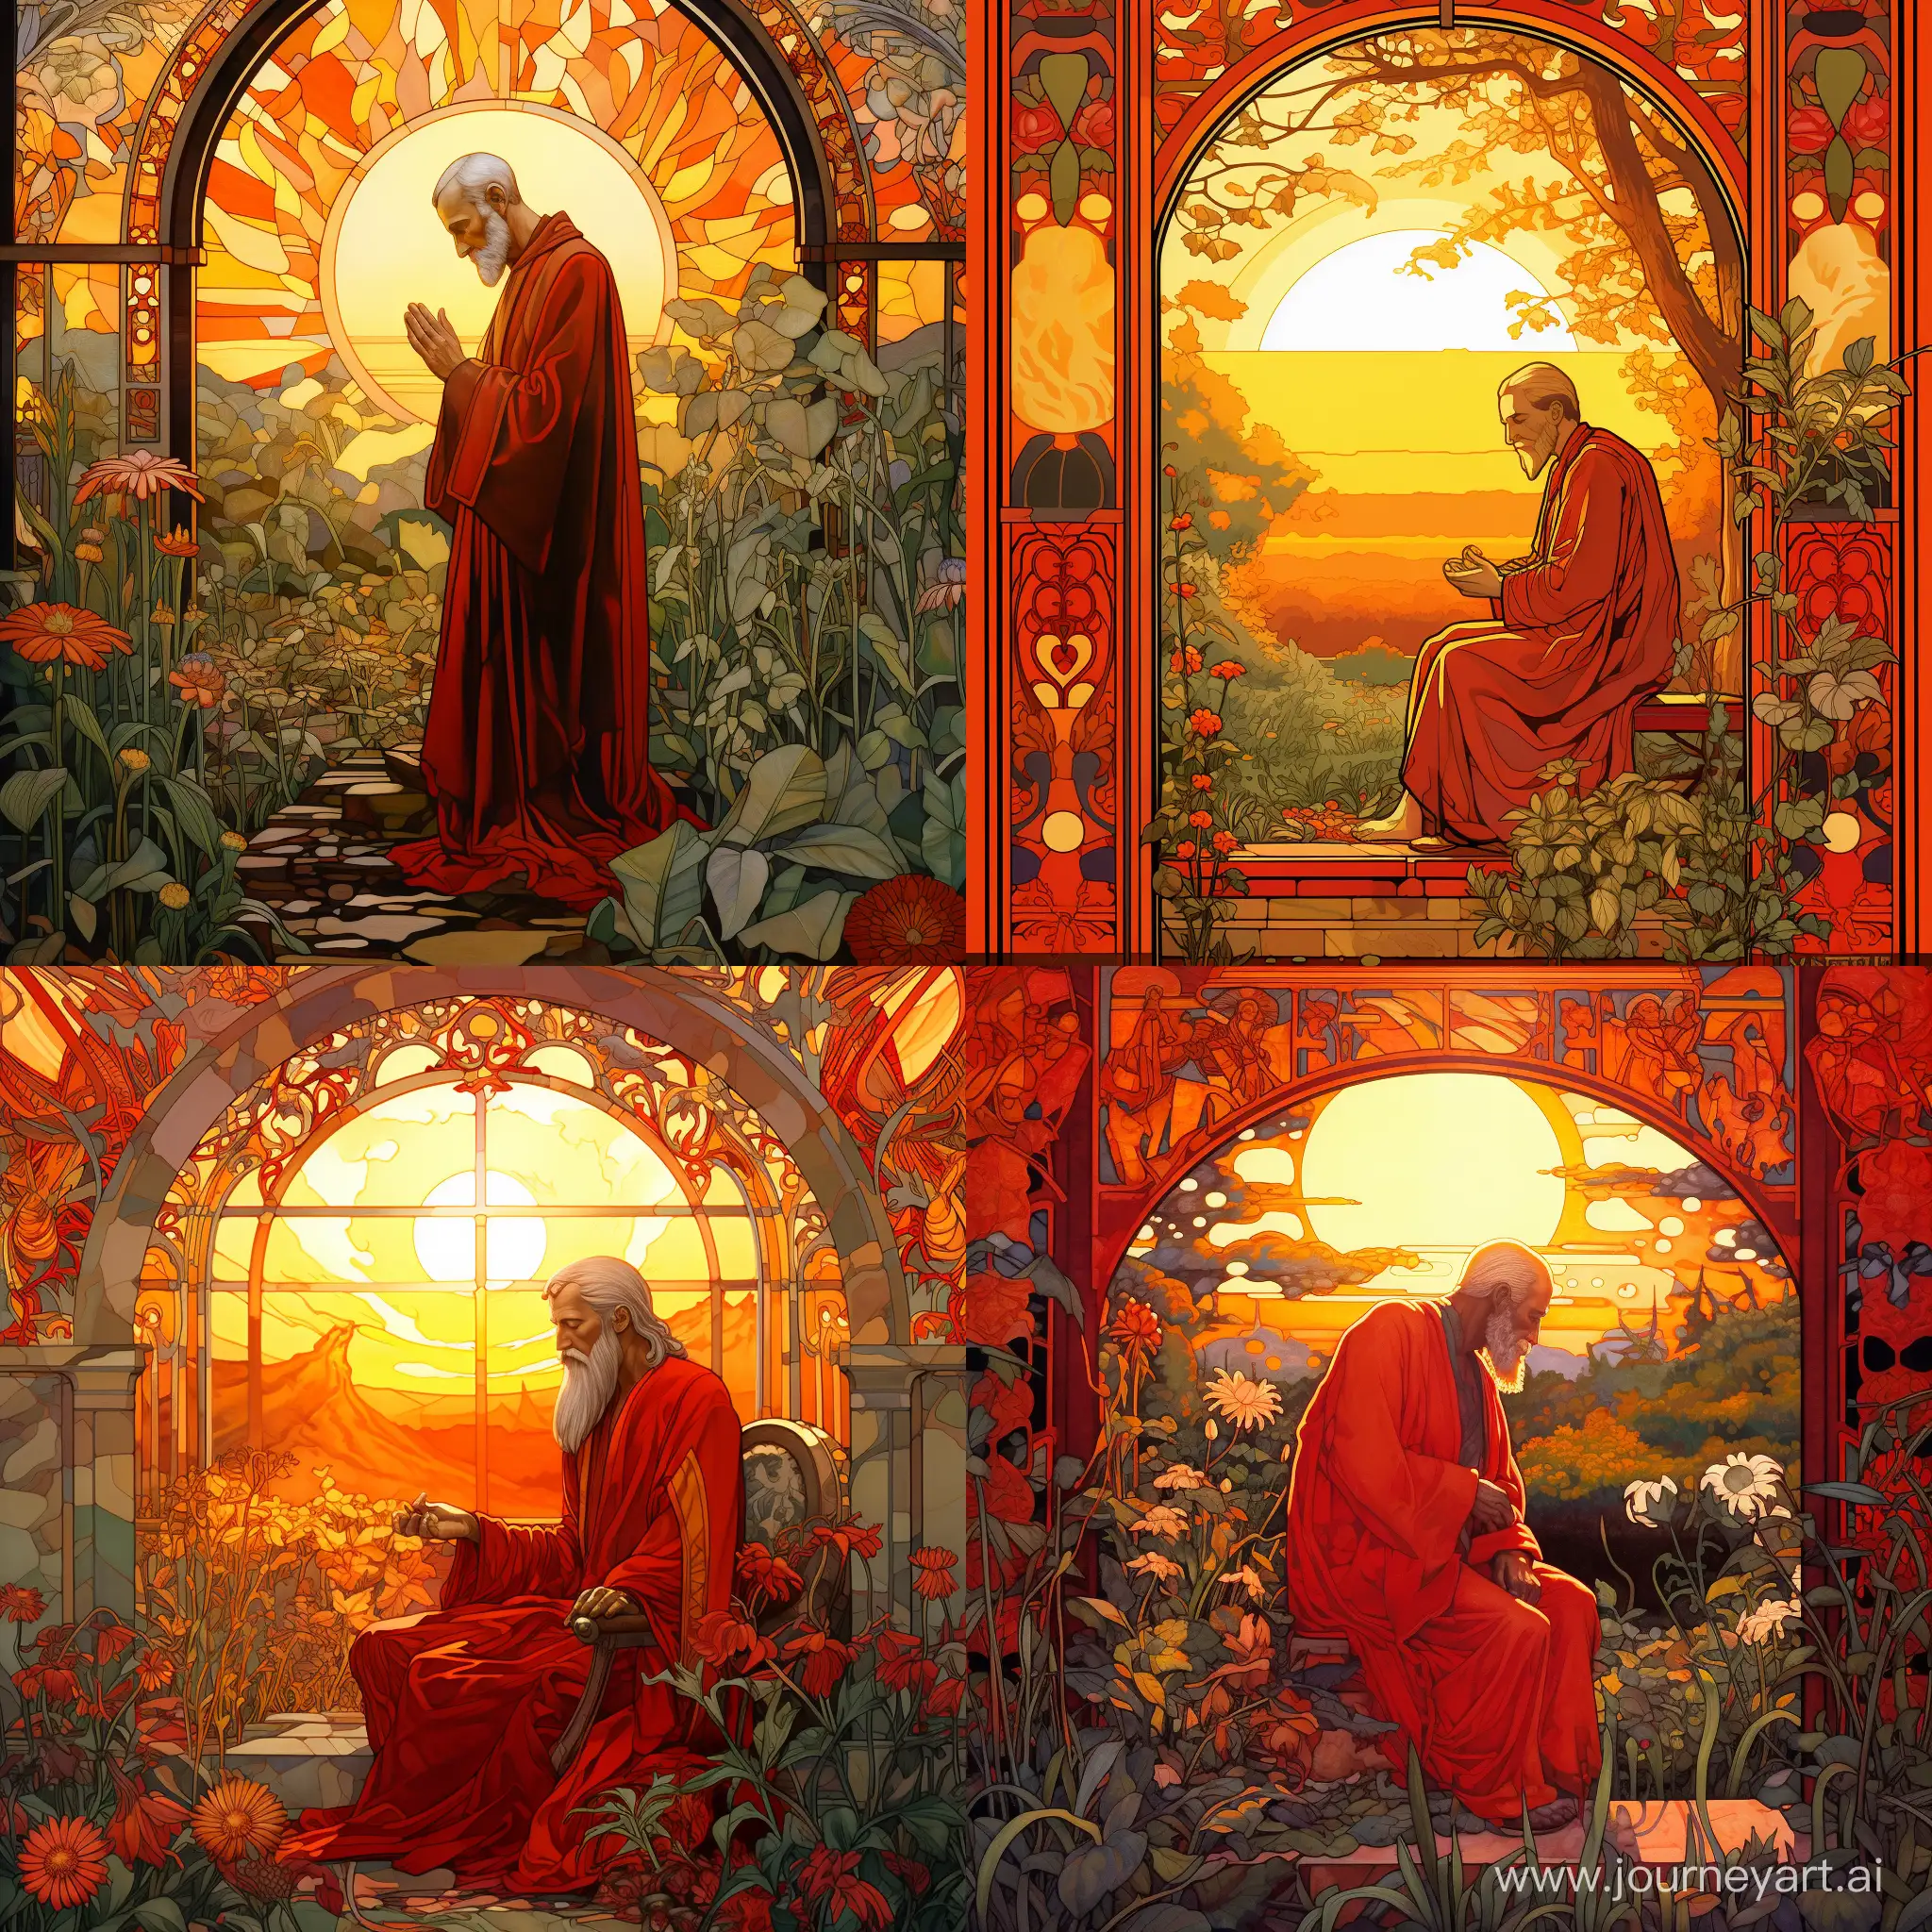 Mournful-King-in-Ornate-Red-Vestment-Amidst-Enchanting-Garden-at-Sunset